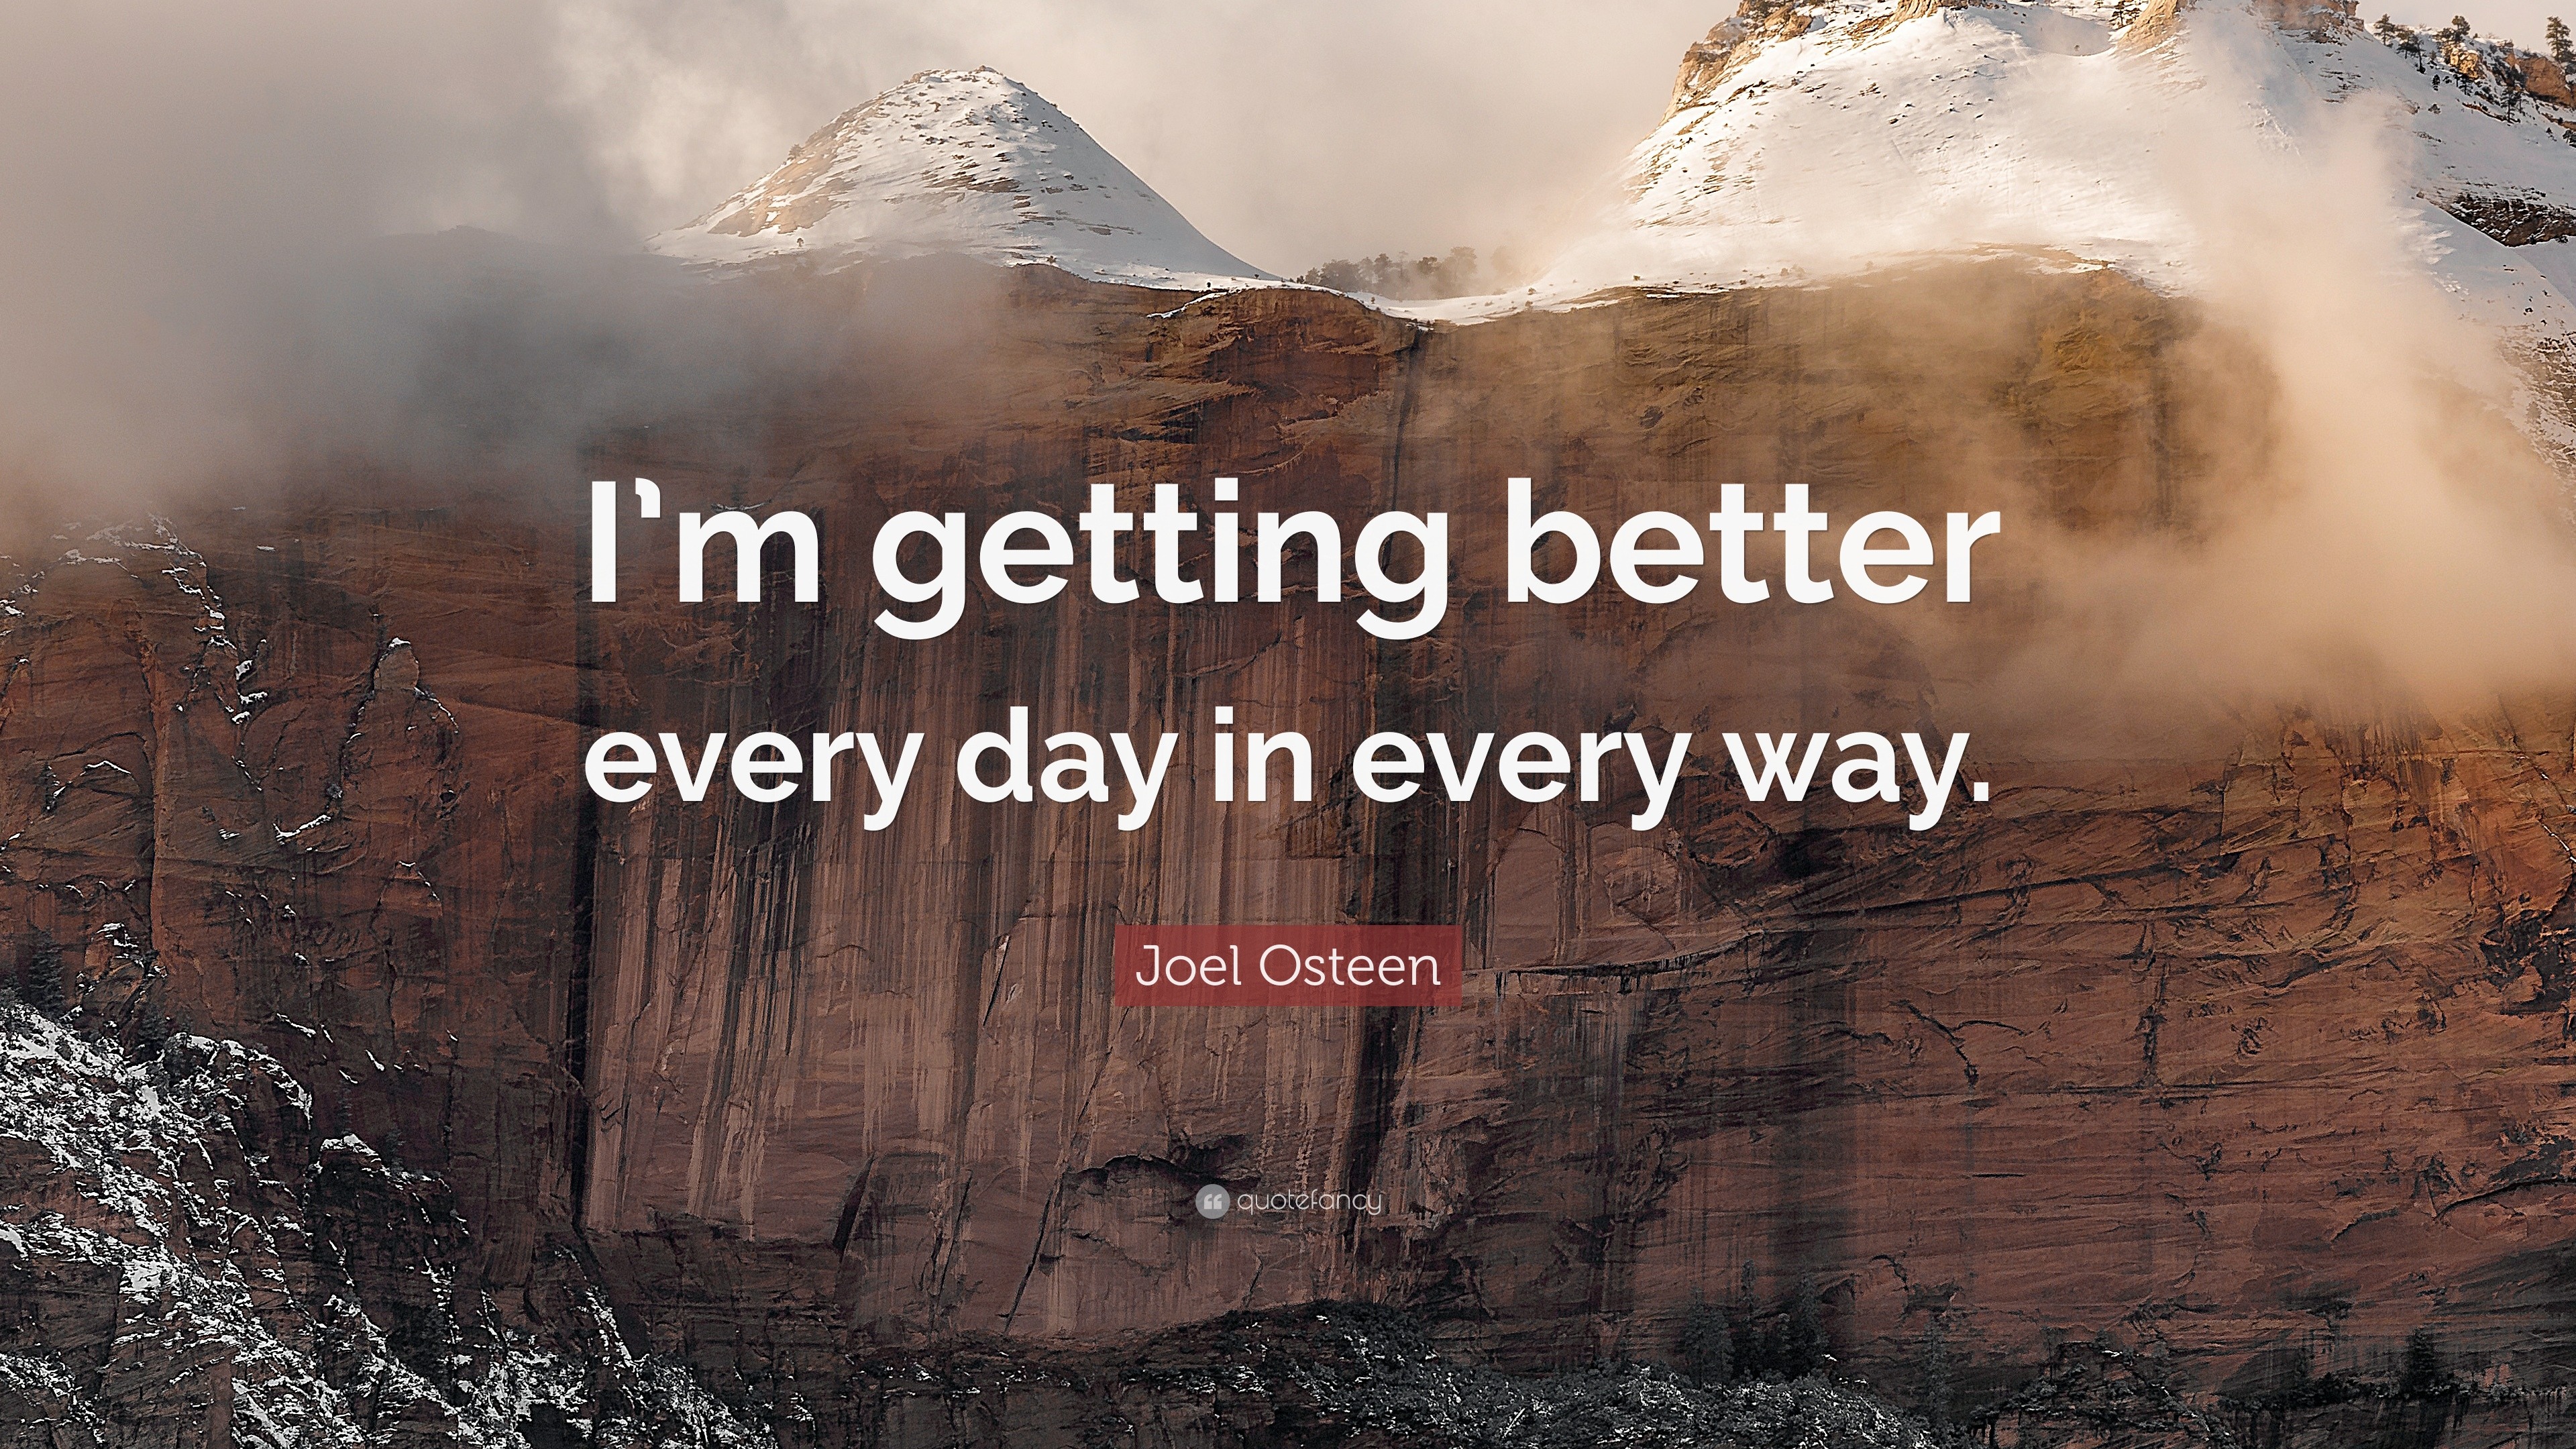 Joel Osteen Quote “I’m getting better every day in every way.” (12